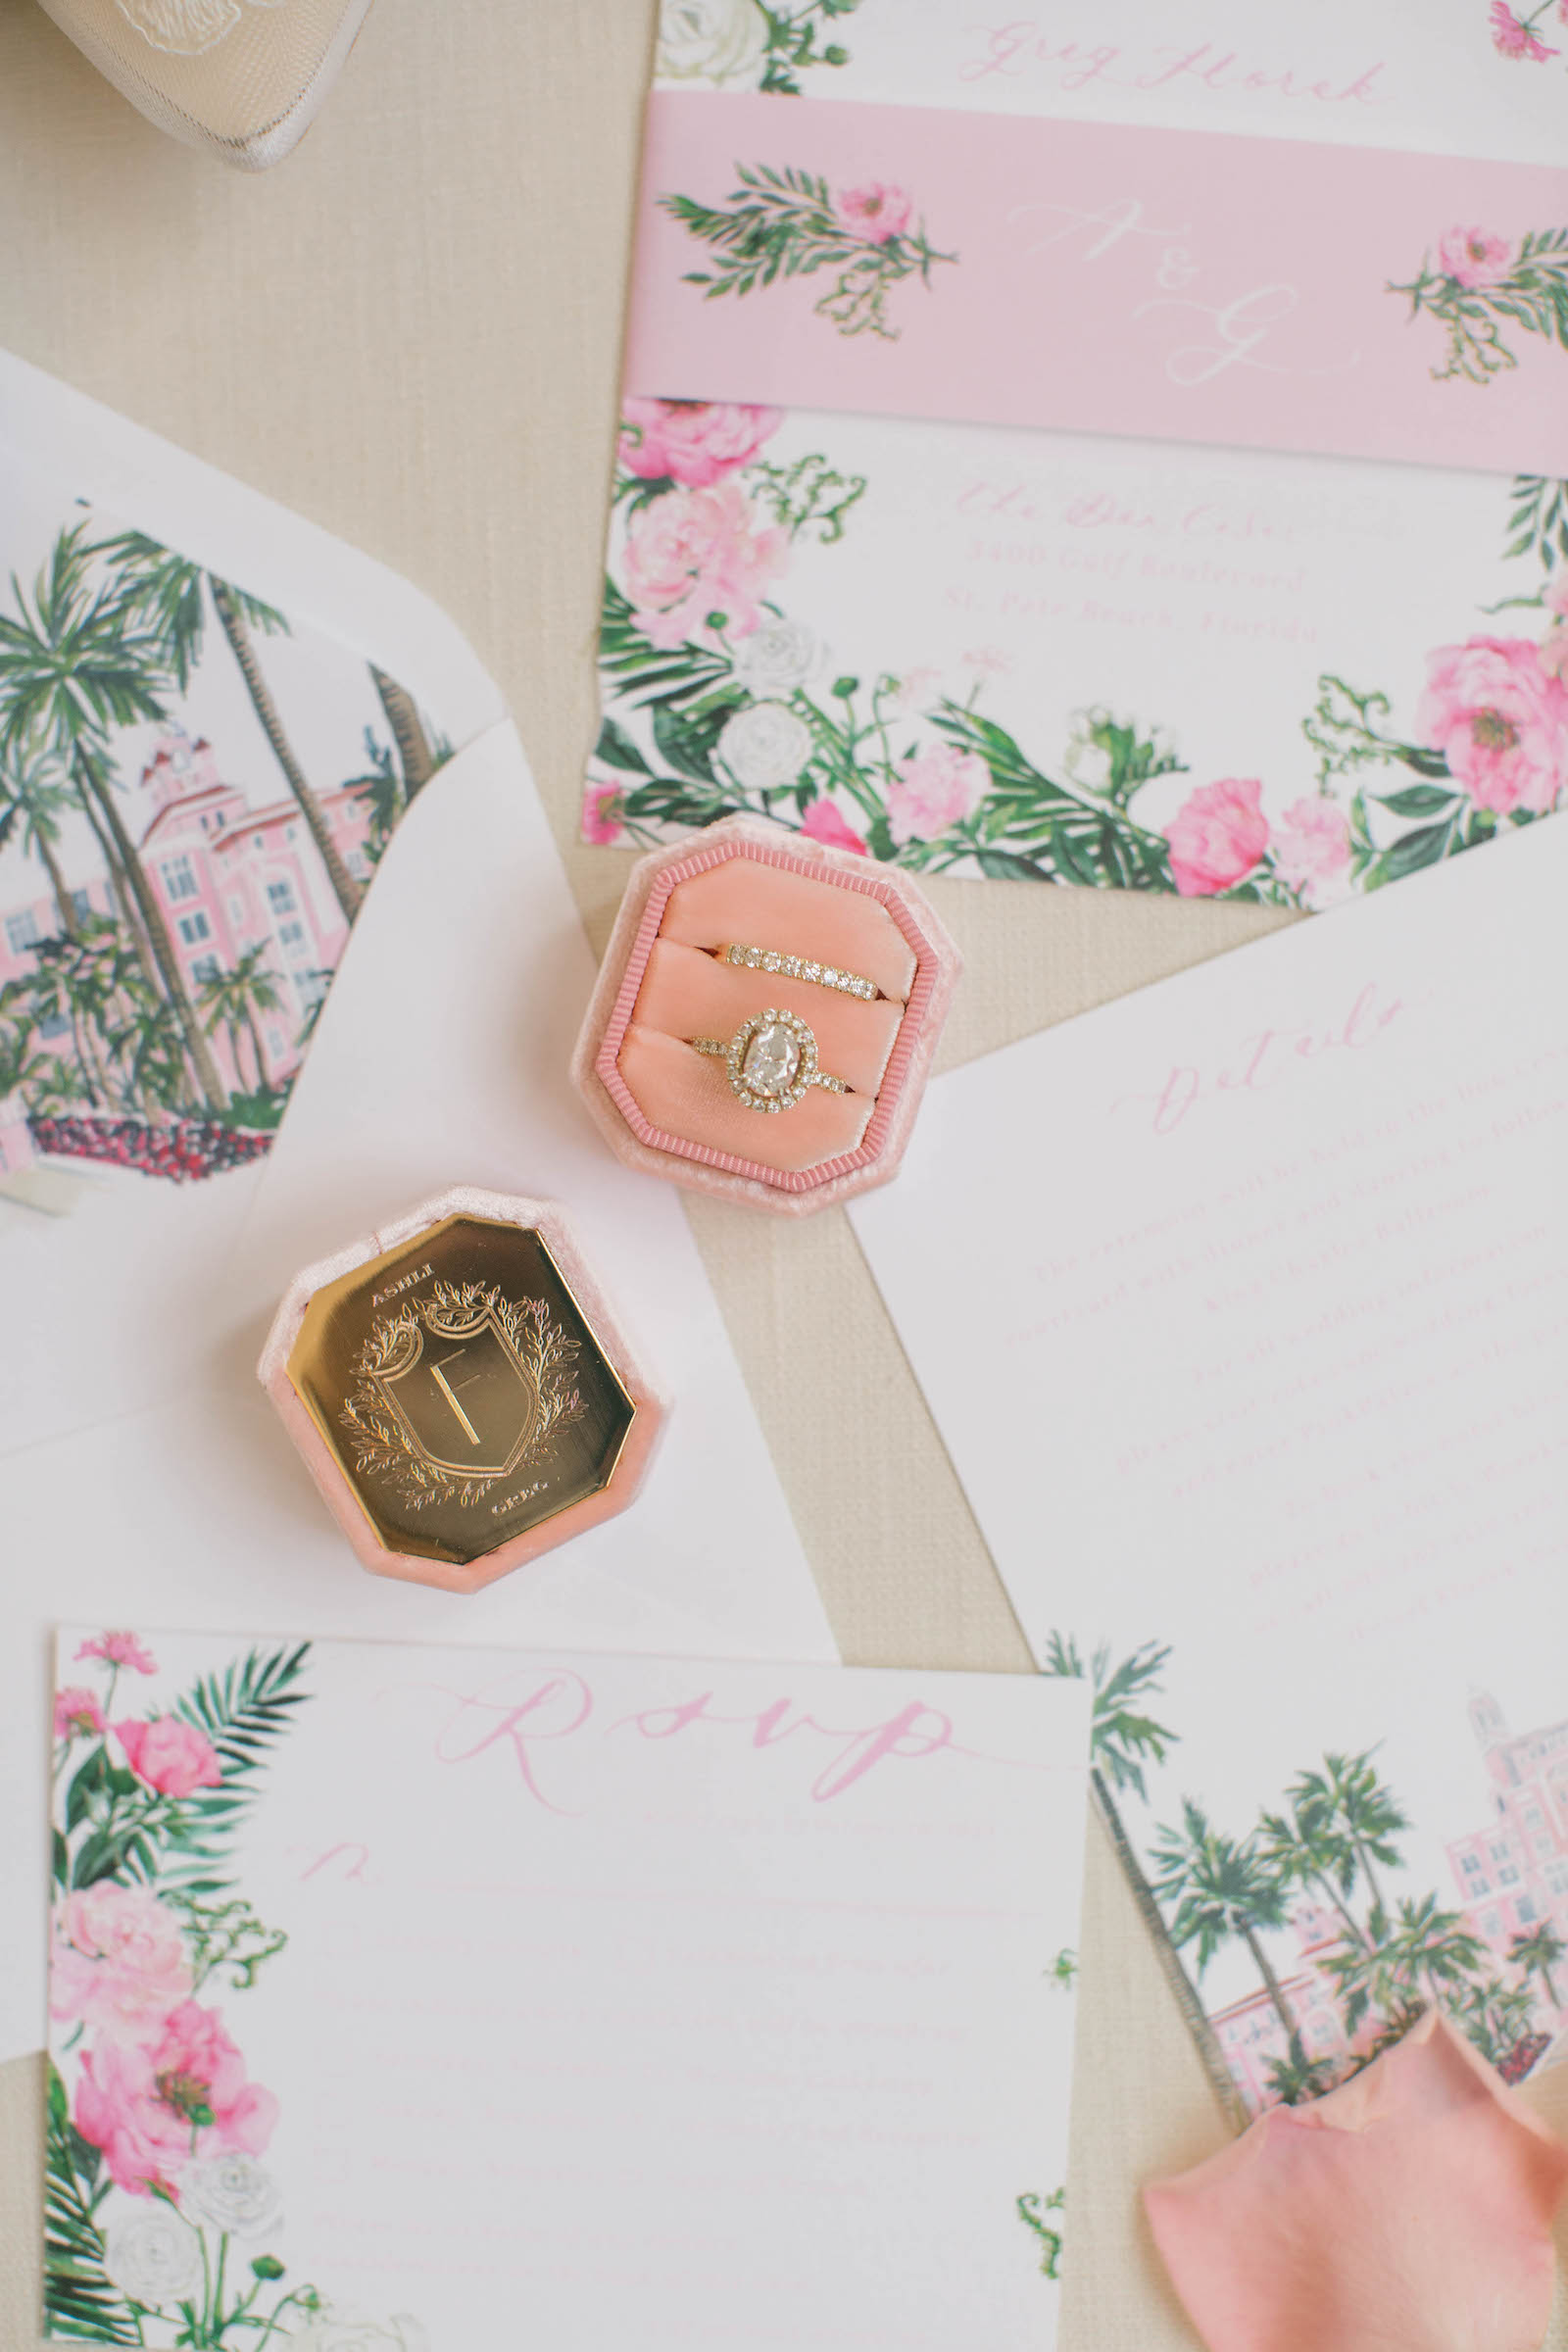 Engagement Ring in Pink Velvet Ring Box, Pink Floral Watercolor Wedding Invitation